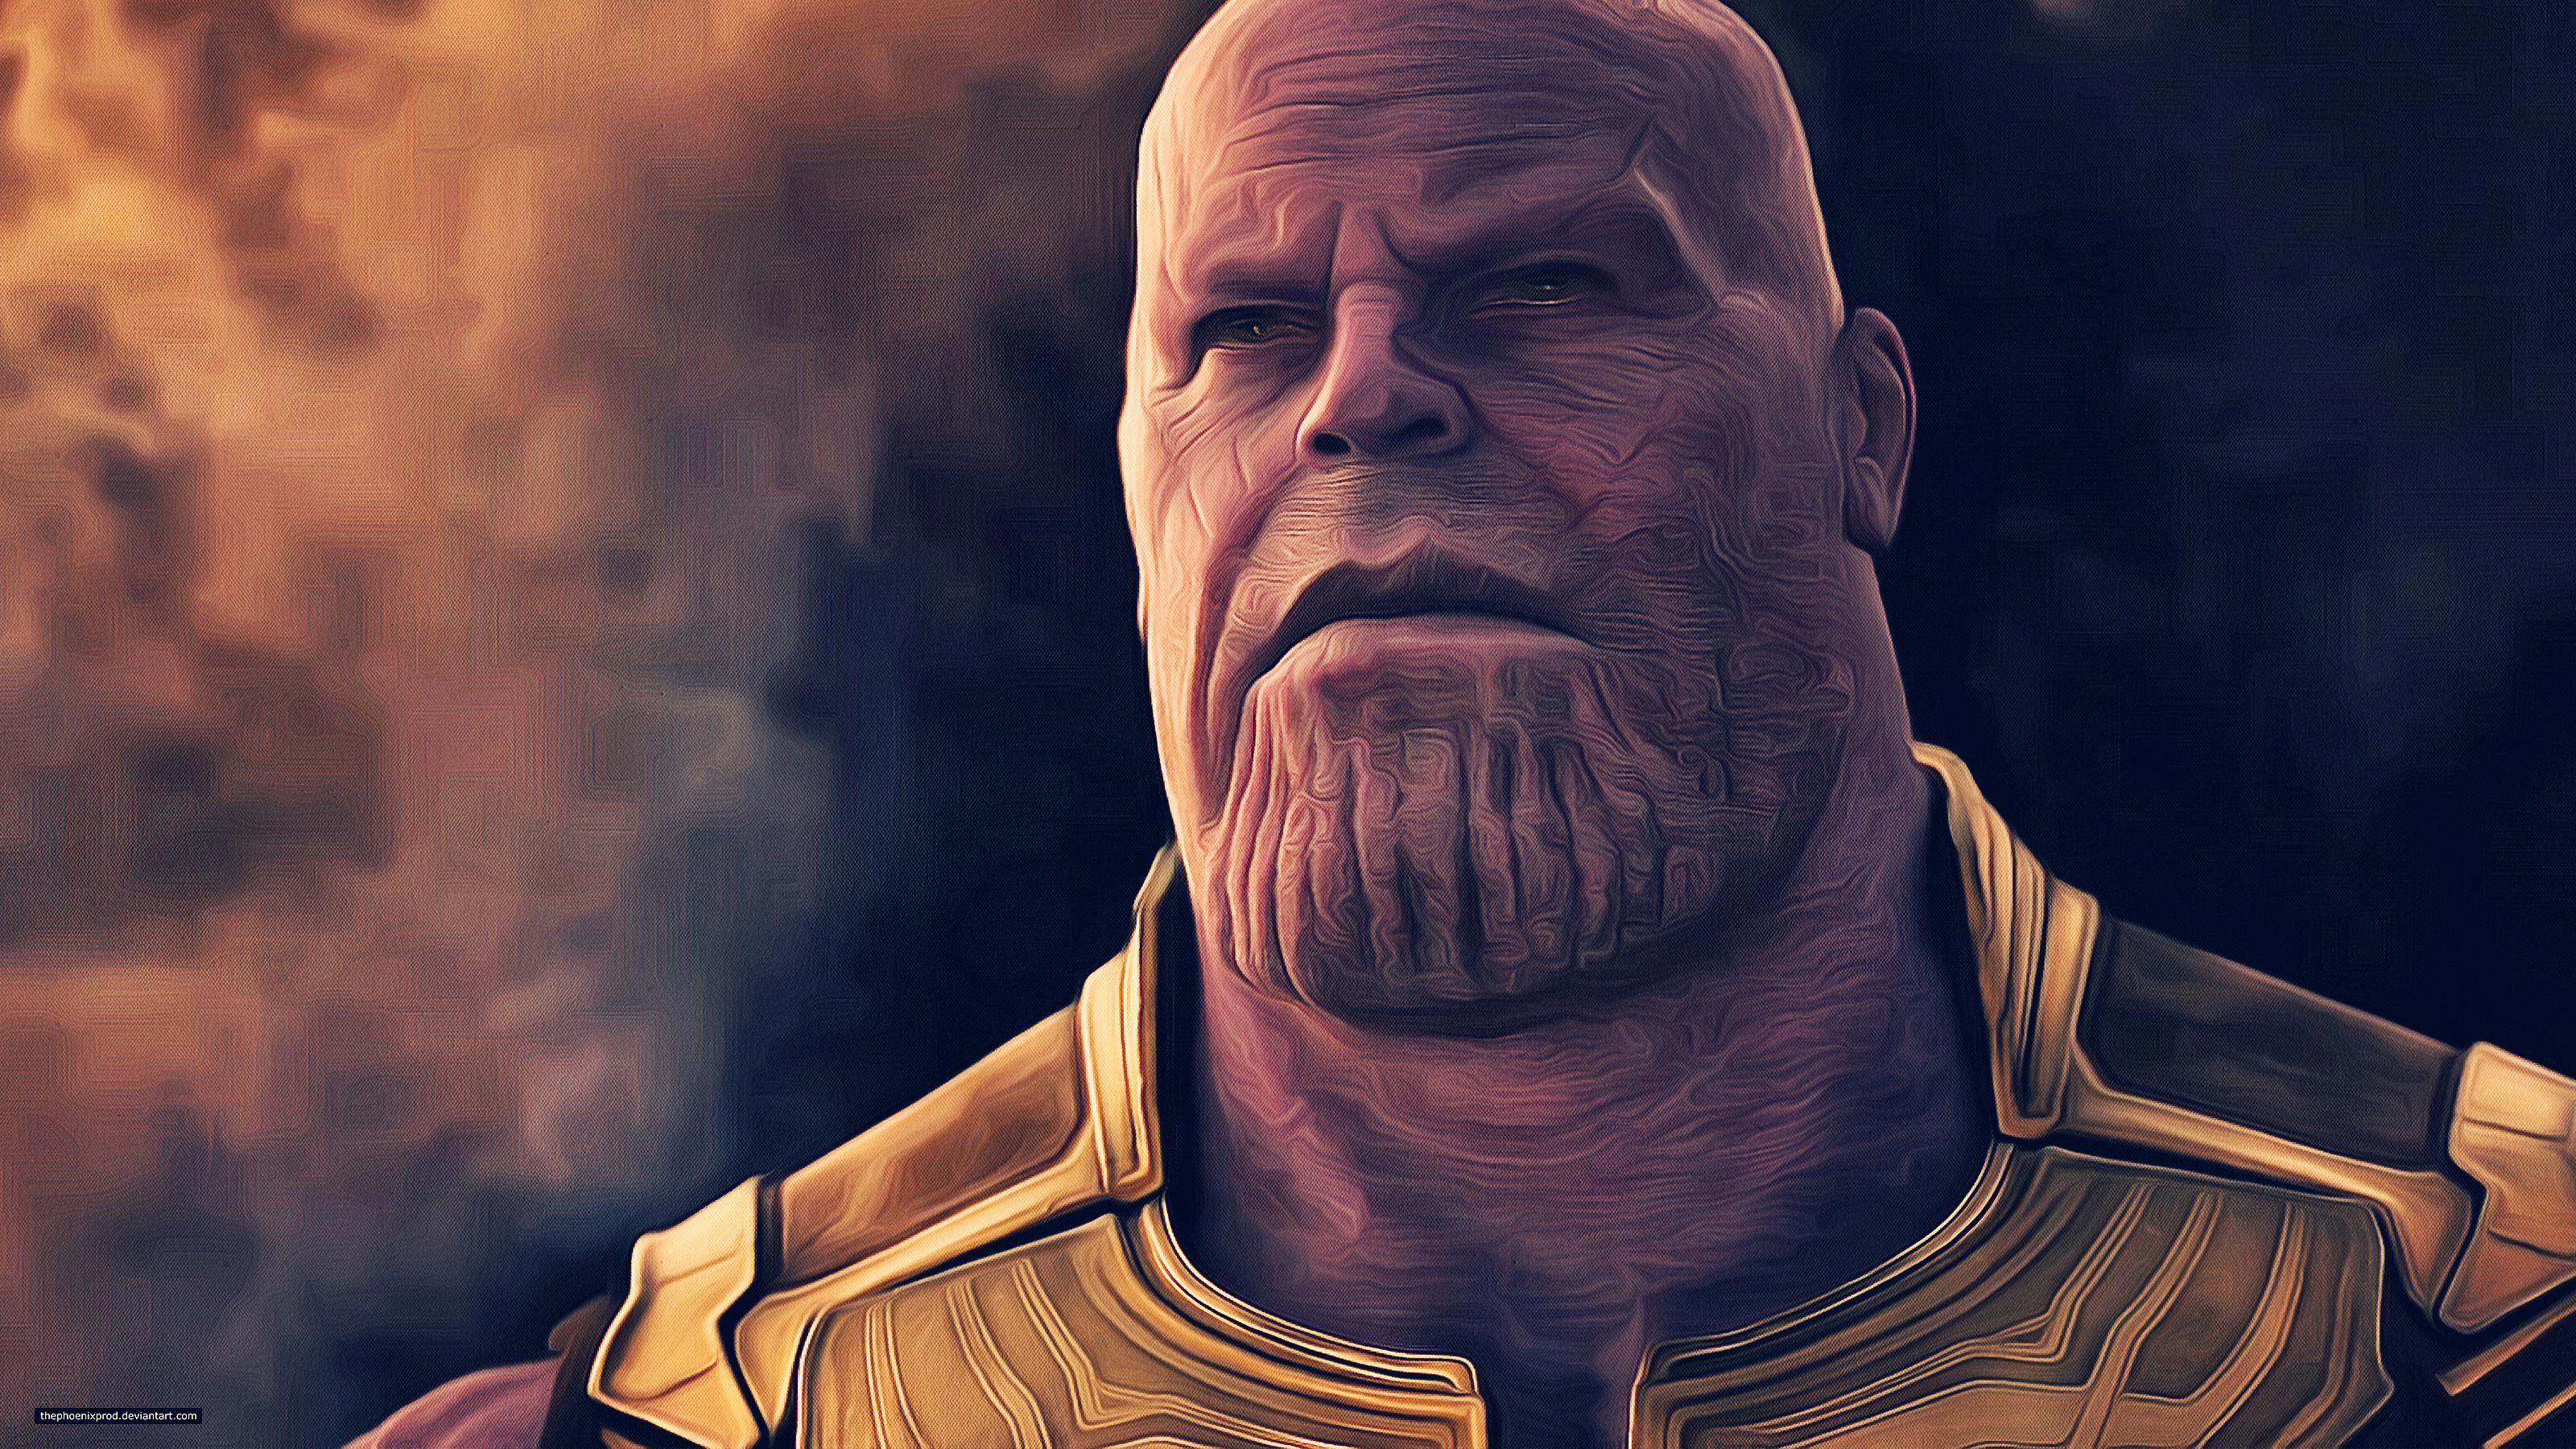 Thanos In Avengers Infinity War 4k Artwork, HD Movies, 4k Wallpapers, Images, Backgrounds ...